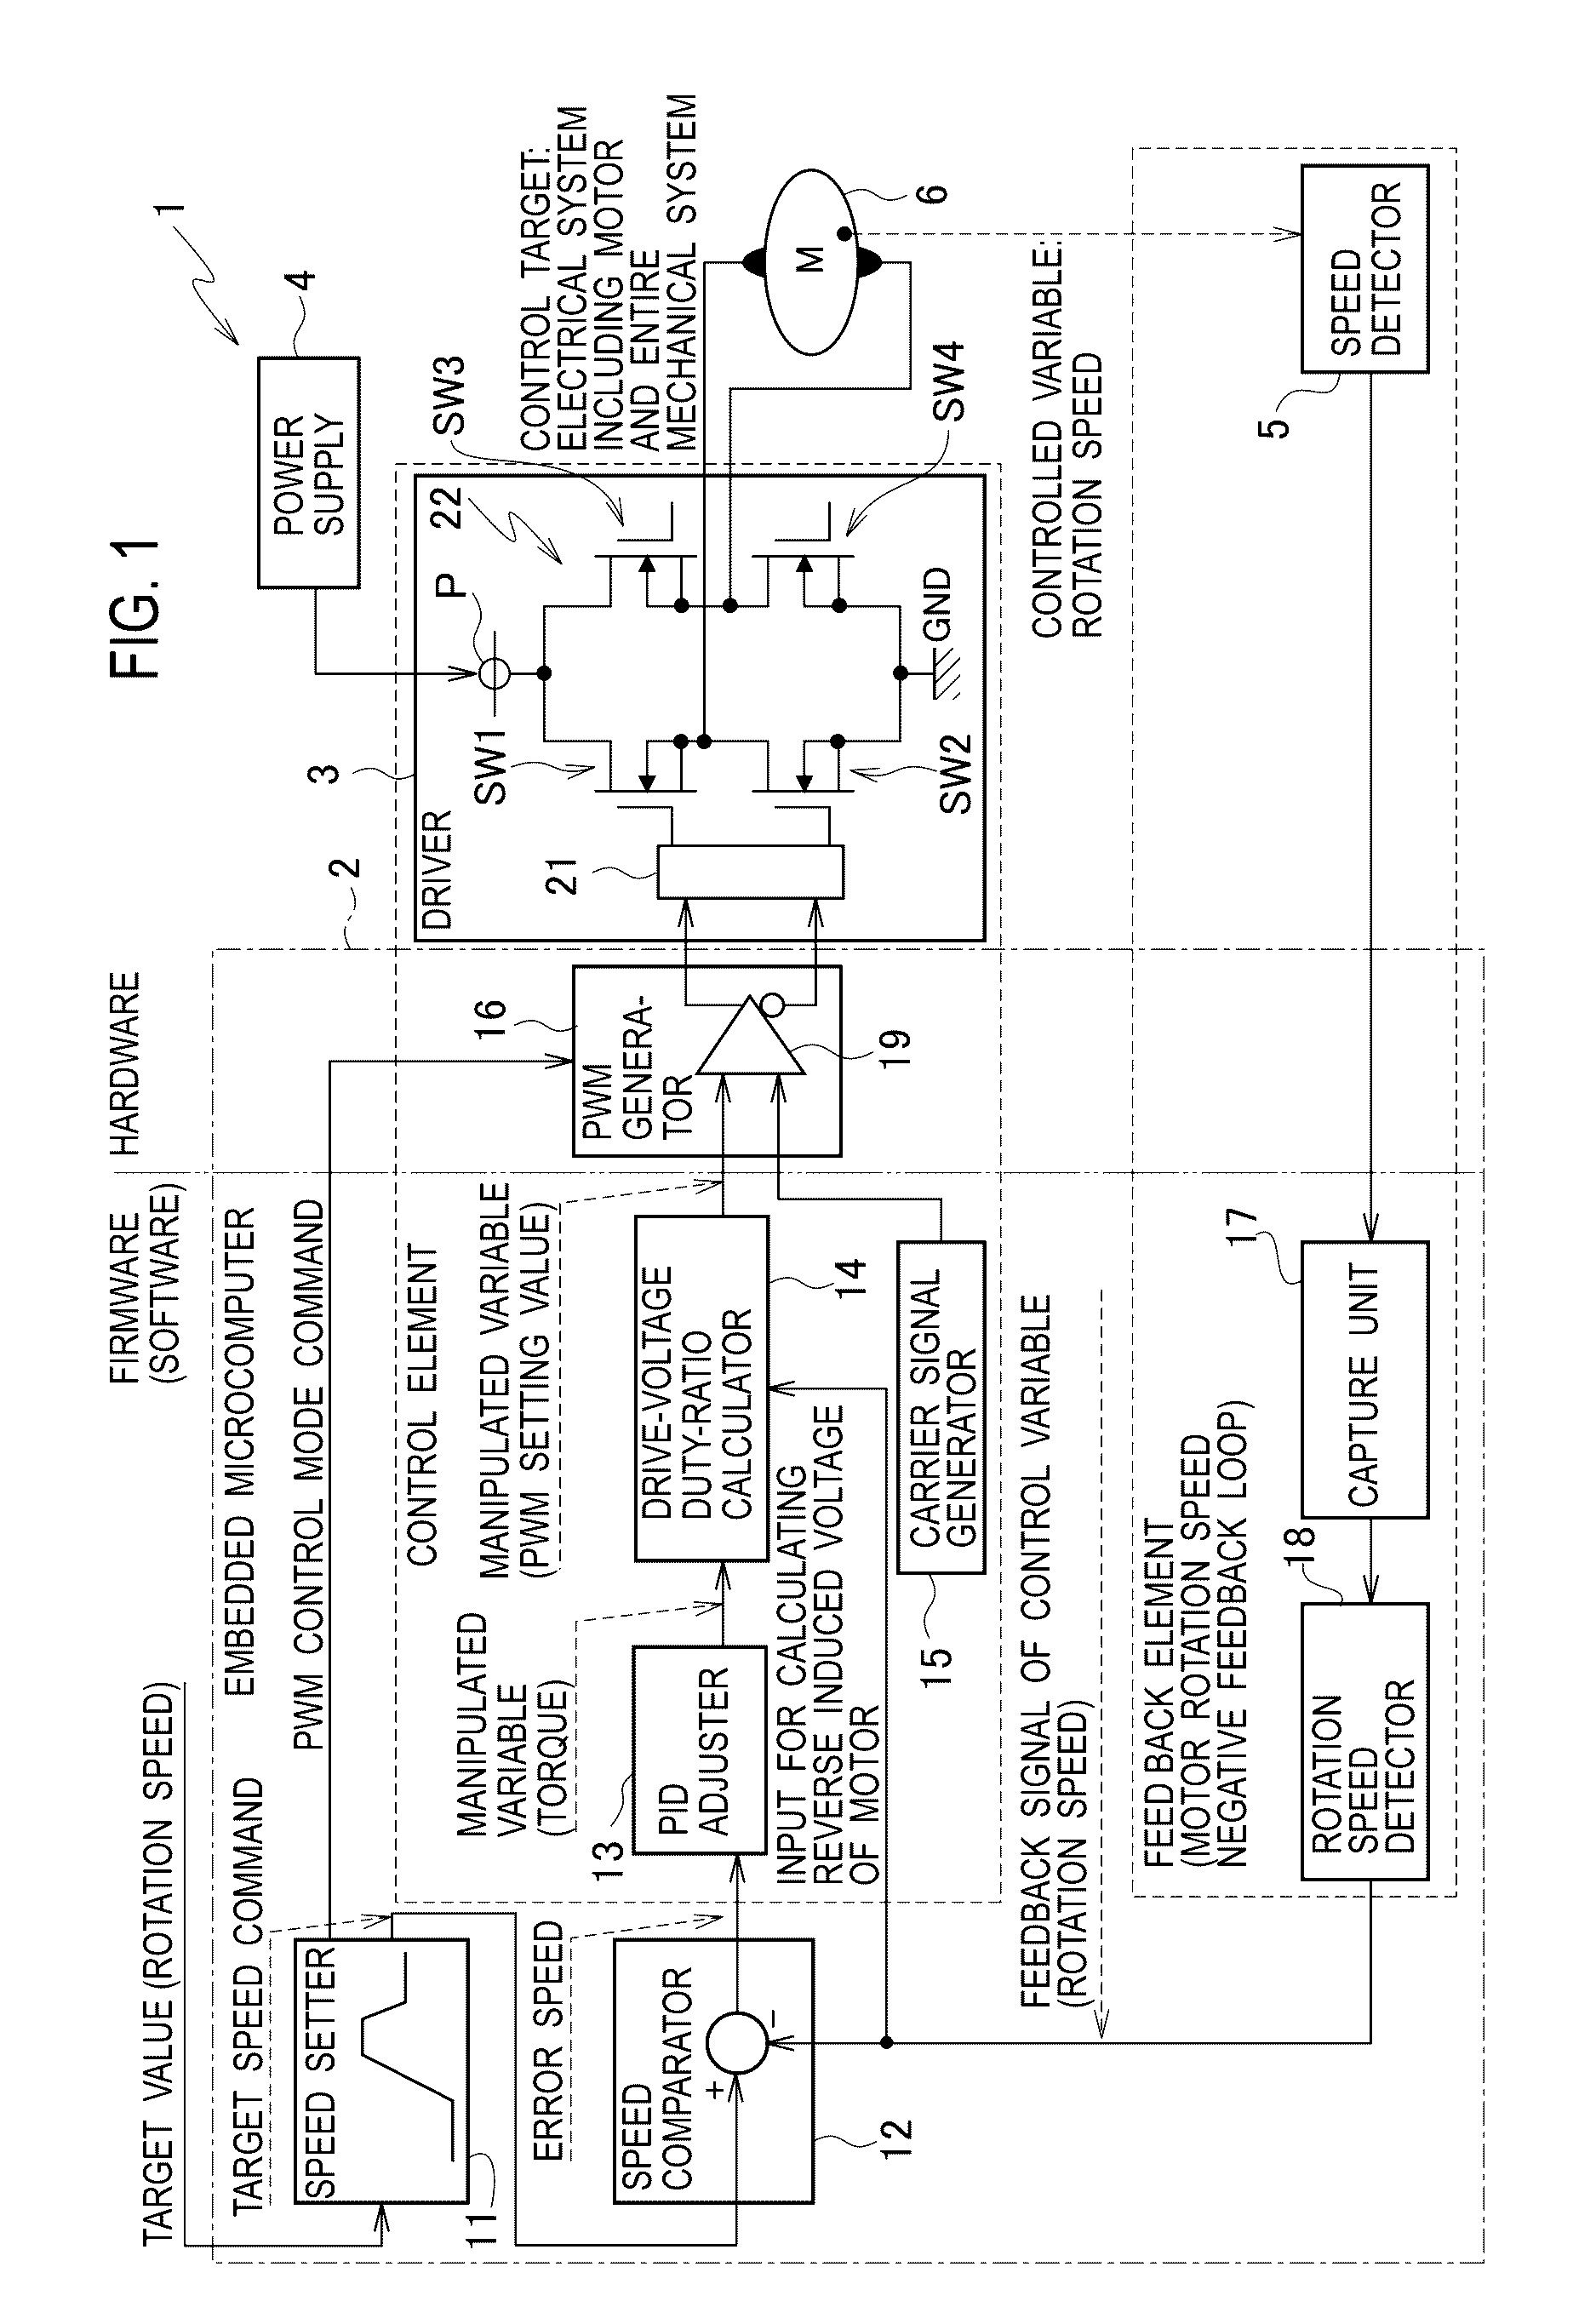 Drive control device using pwm control of synchronous rectification type